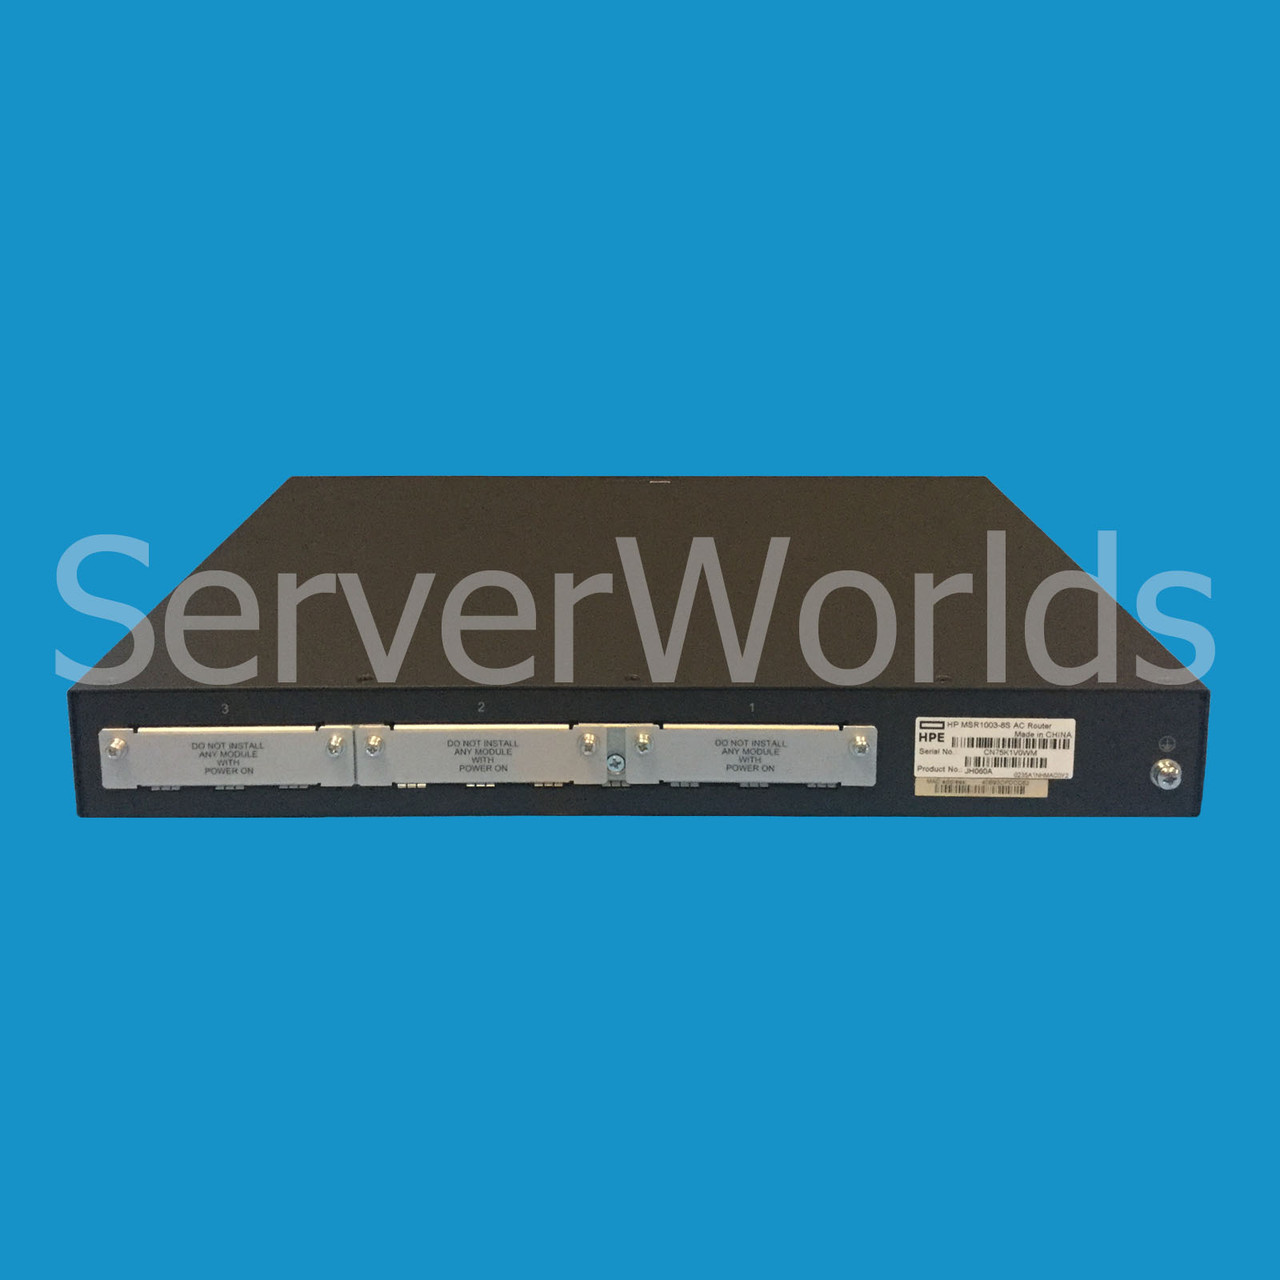 HP JH060A MSR1003-8S Router  JH060-61001